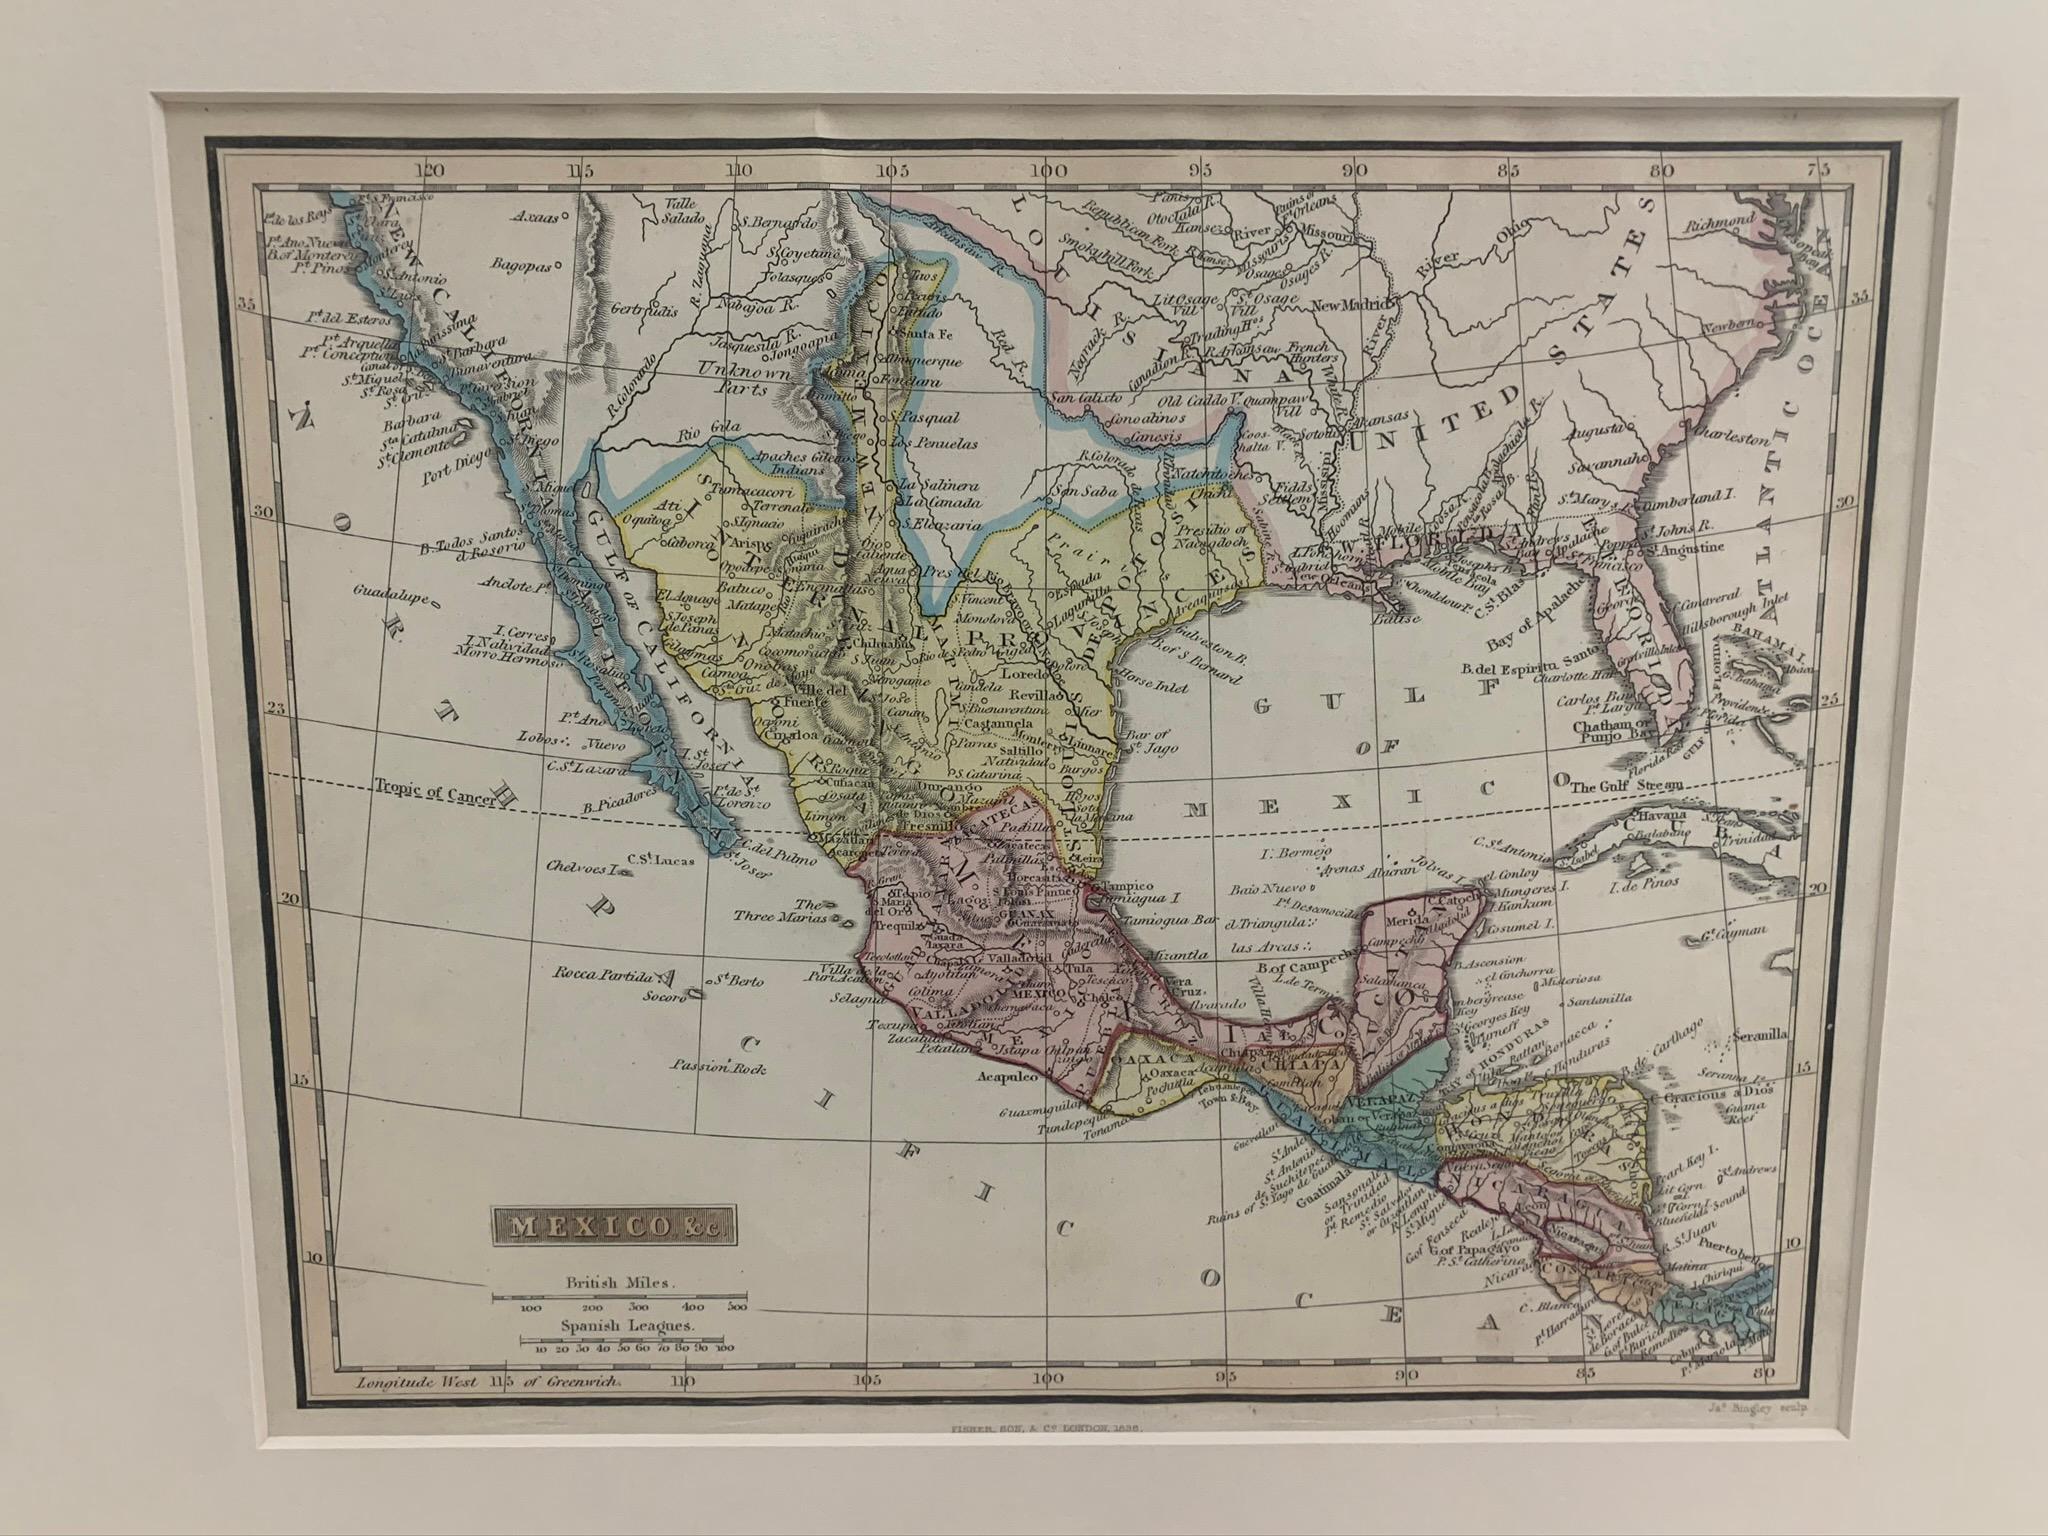 Framed 1838 Mexico & Gulf of Mexico map. Printed by Fisher, Son & Co. of London in 1838. As found framed condition. Map has not been examined outside of the frame. 